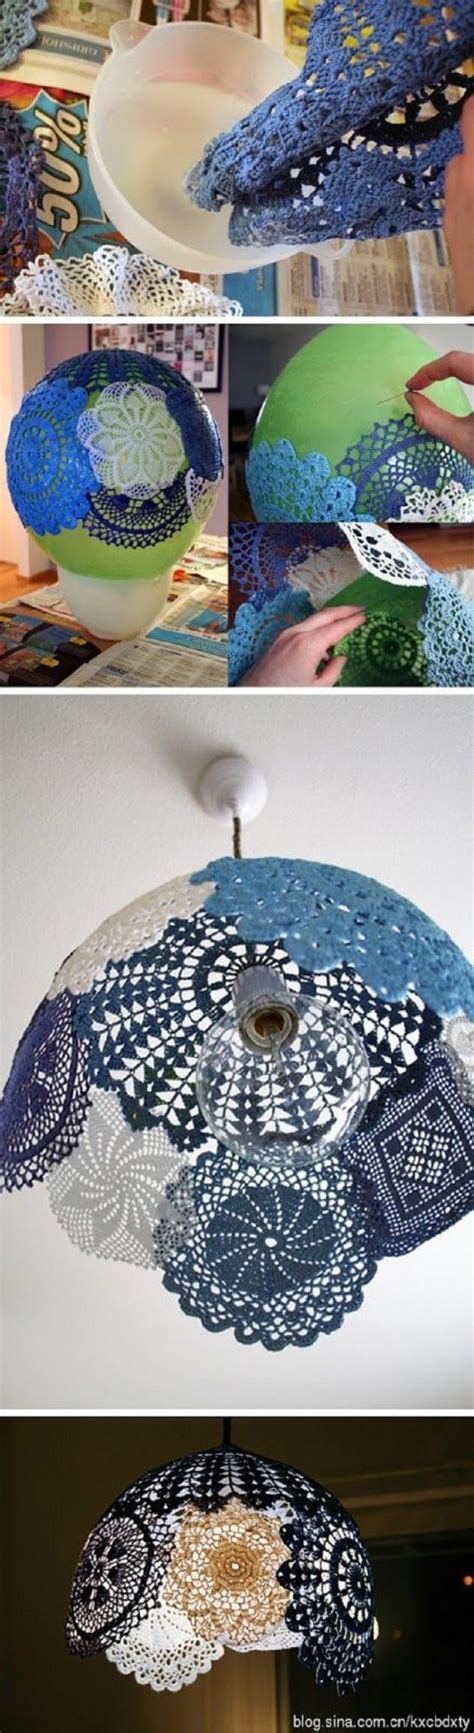 It's often said that if you sincerely want a thing done well the answer is to do it yourself. 19 The Cheapest & Most Easiest DIY Home Decor Tutorials ...